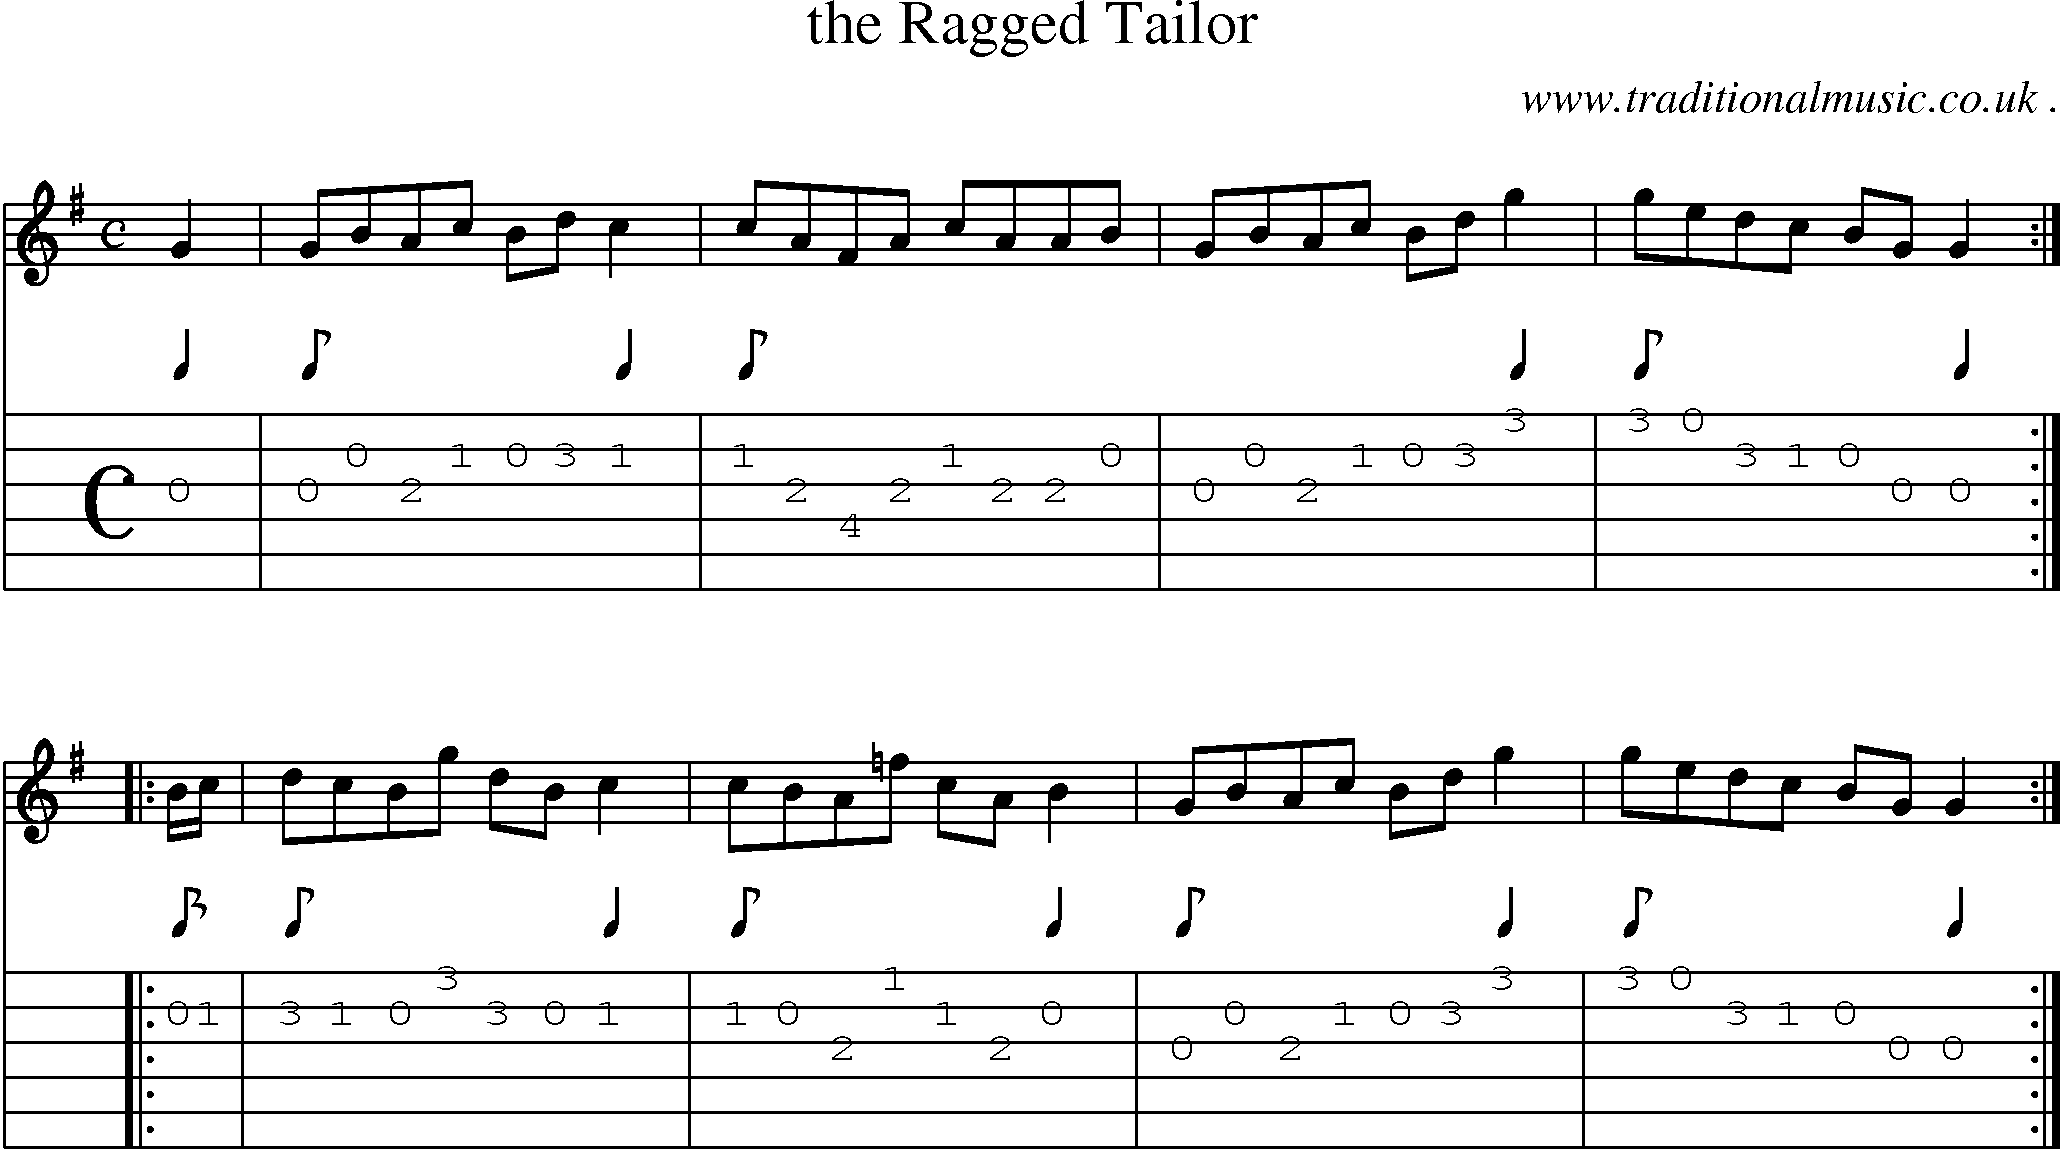 Sheet-Music and Guitar Tabs for The Ragged Tailor